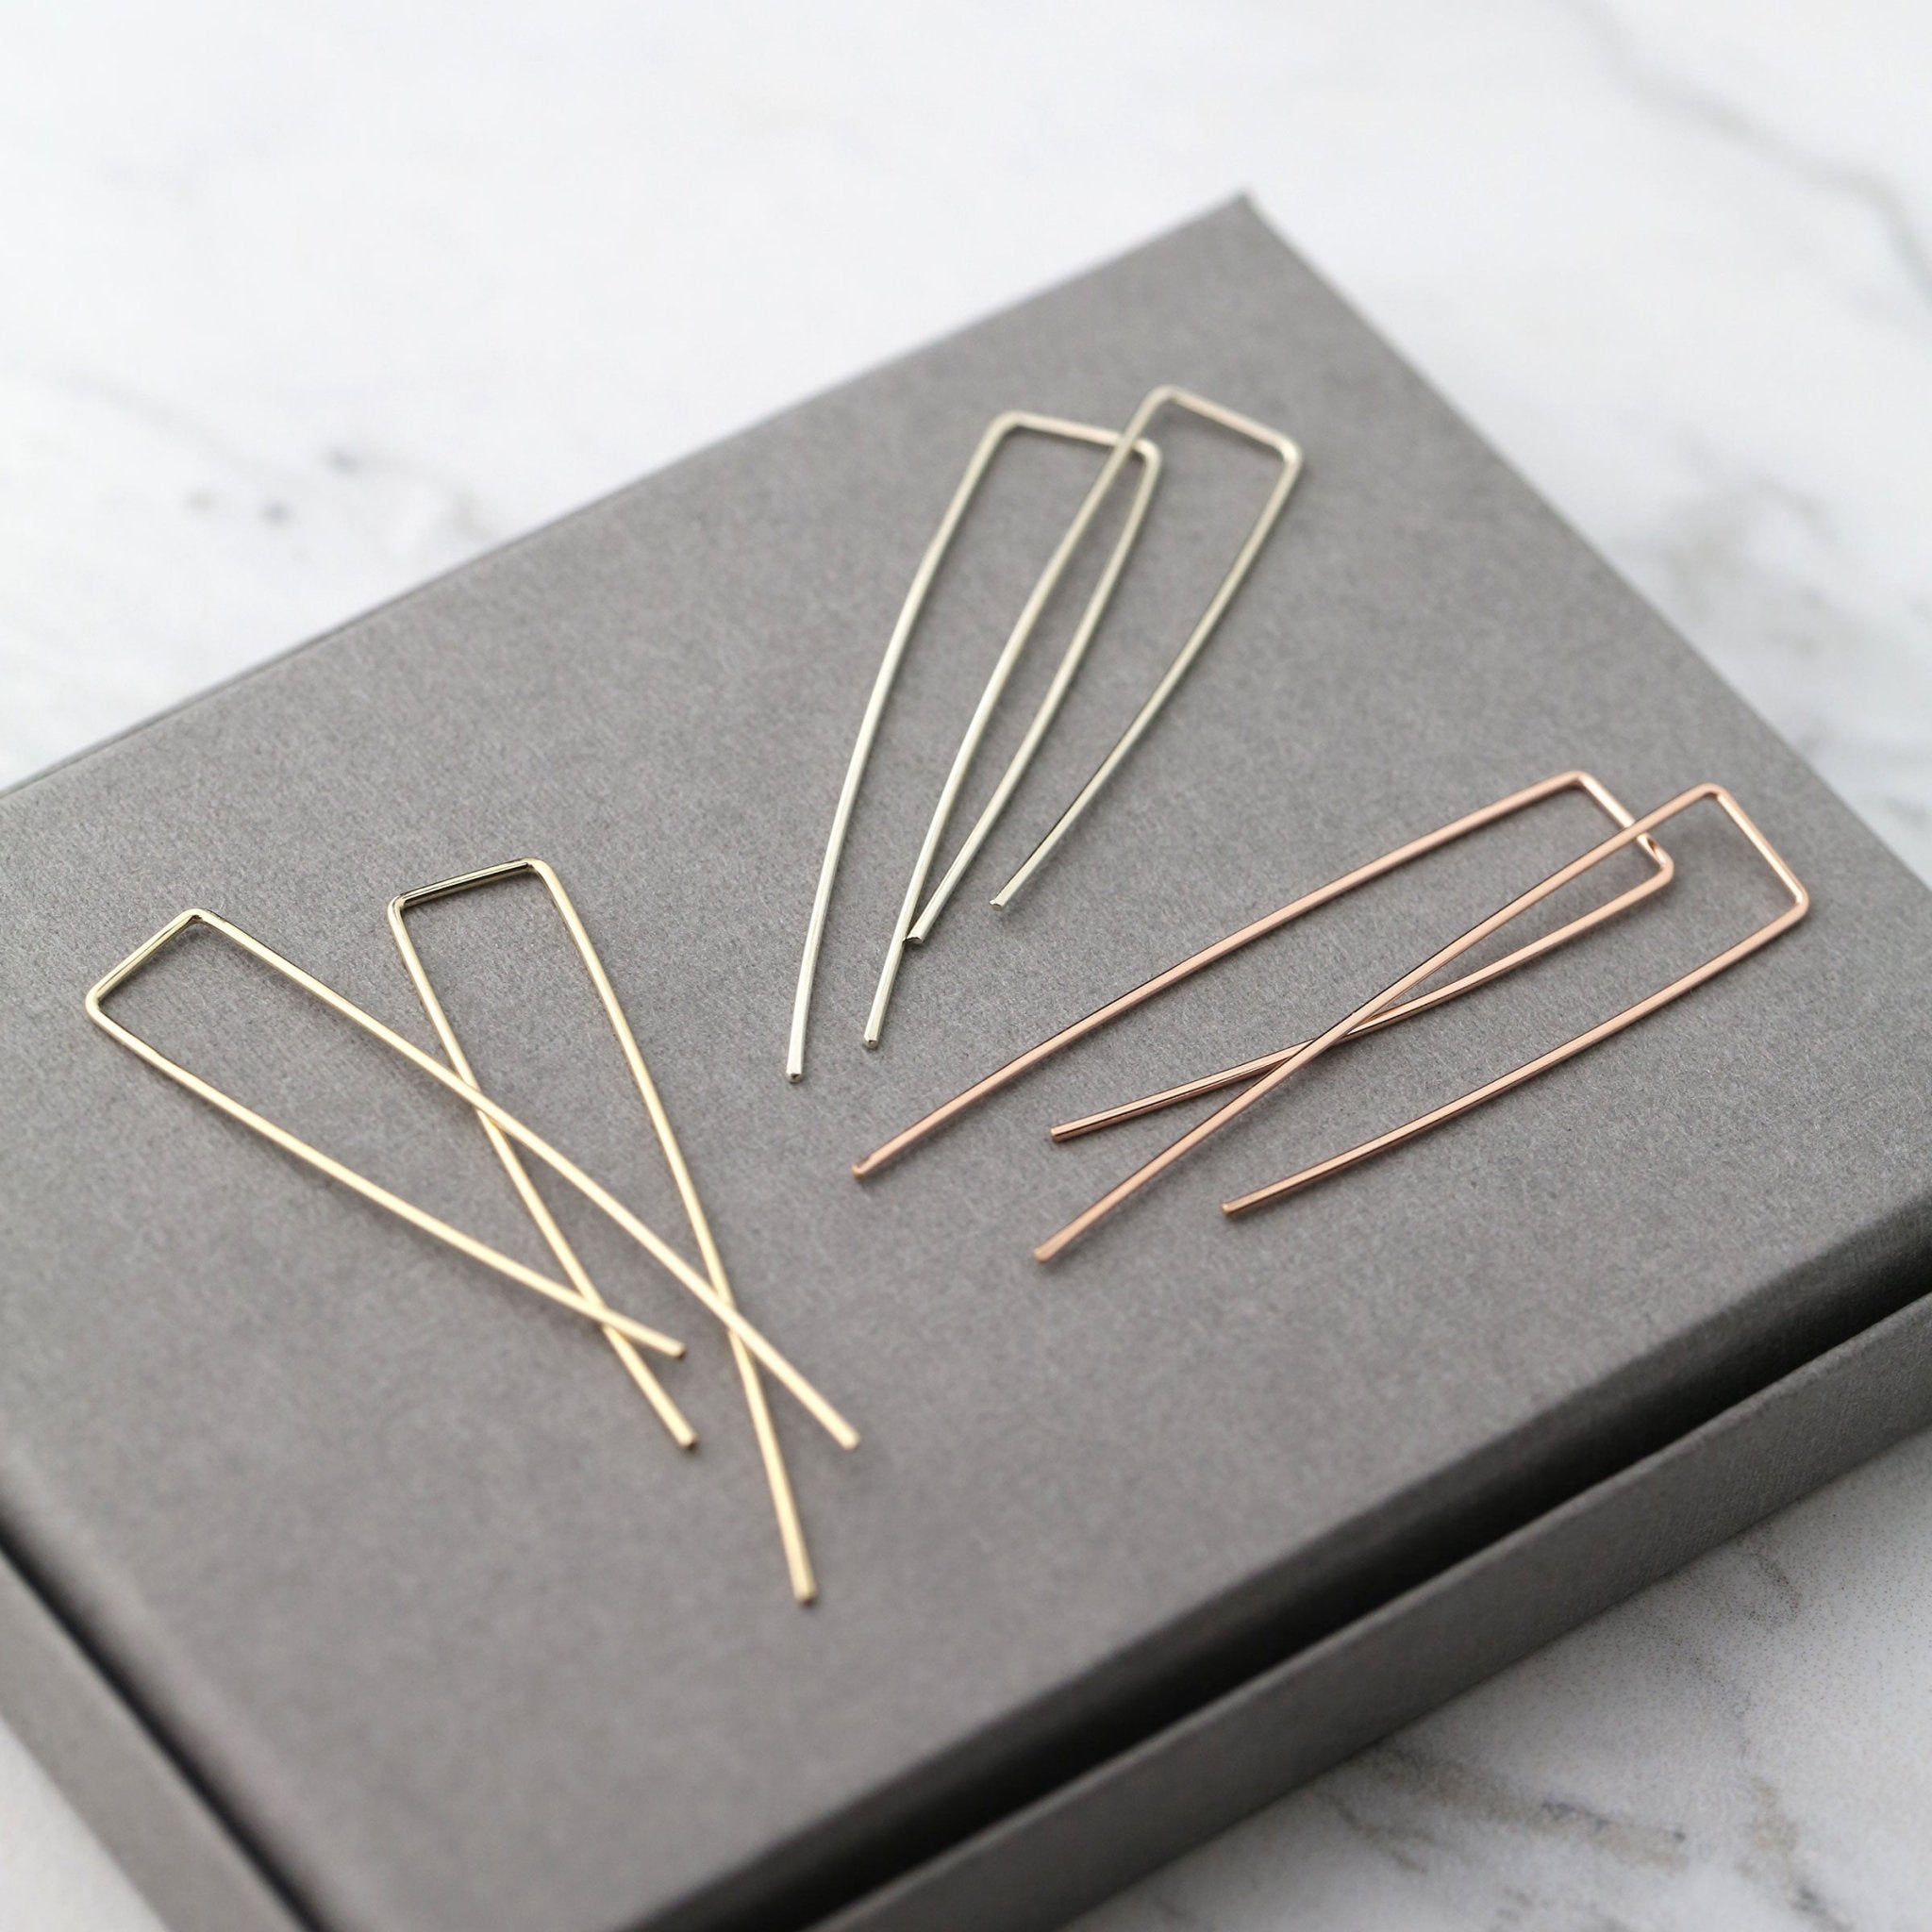 Minimal Wire Architectural Earrings